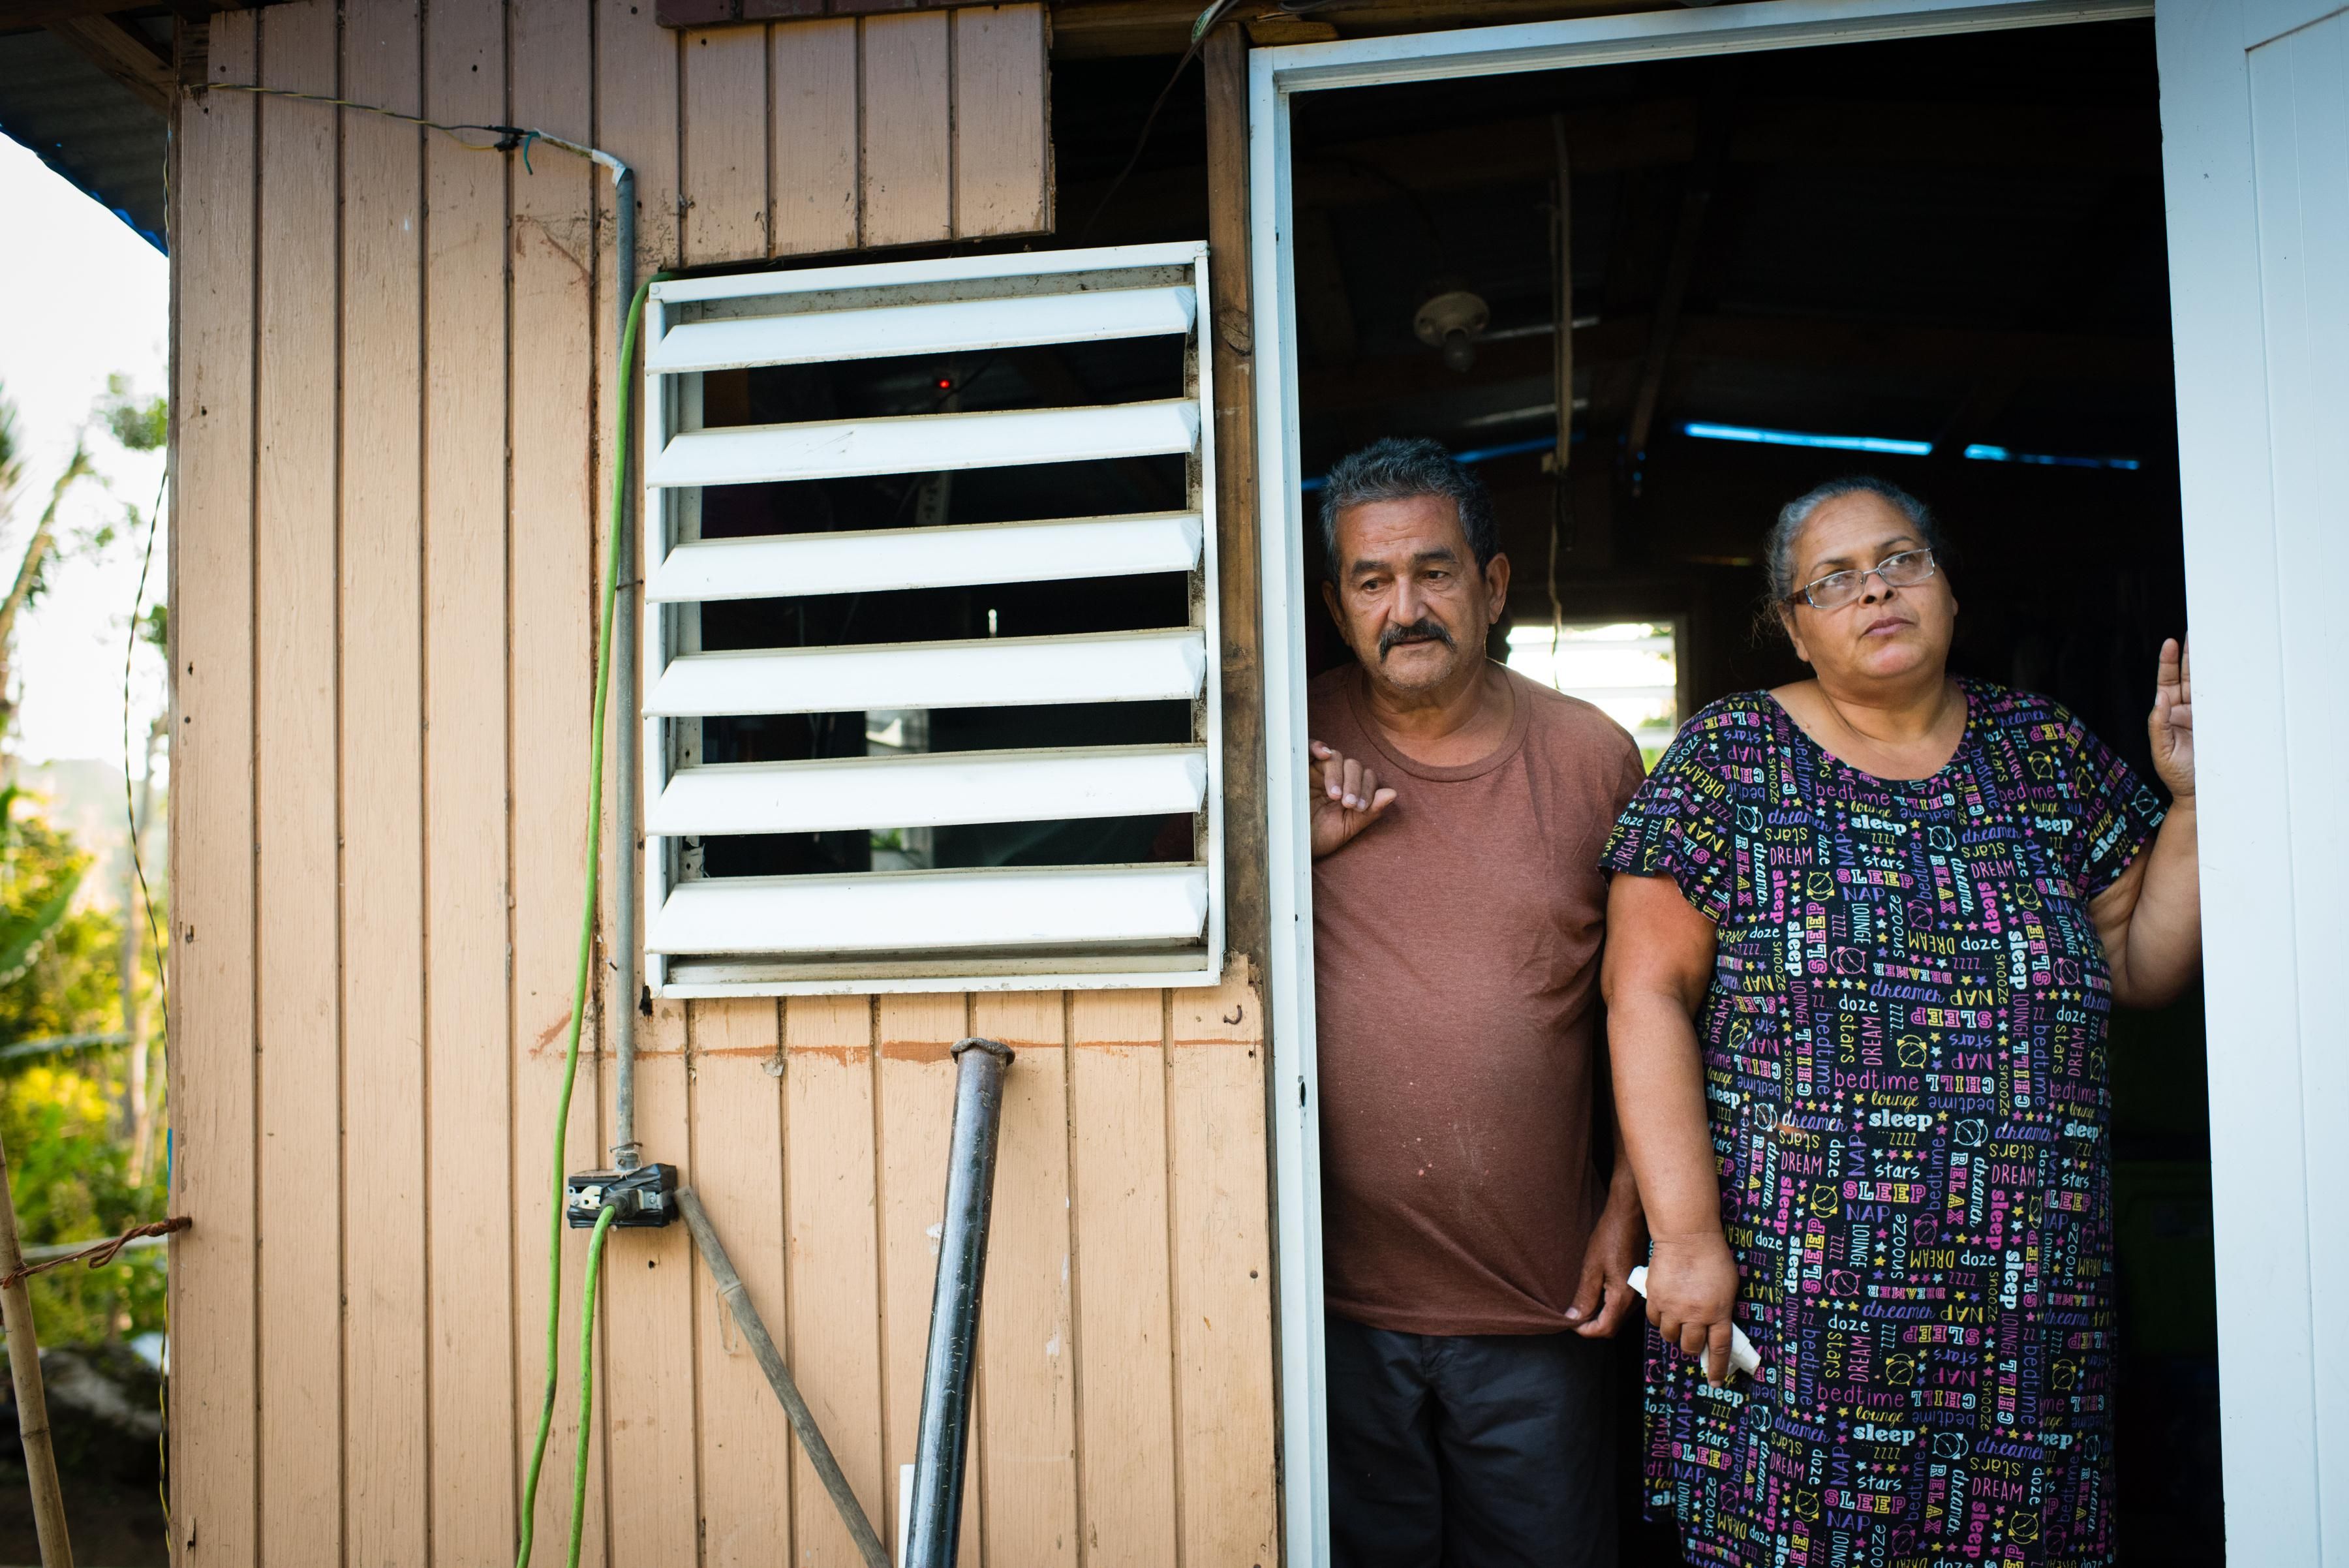 Carlos Fernandez and his wife, Ivette Garcia, stand in the doorway of their temporary house in Villalba, Puerto Rico on August 27, 2018, one year after Hurricane Maria destroyed their home.